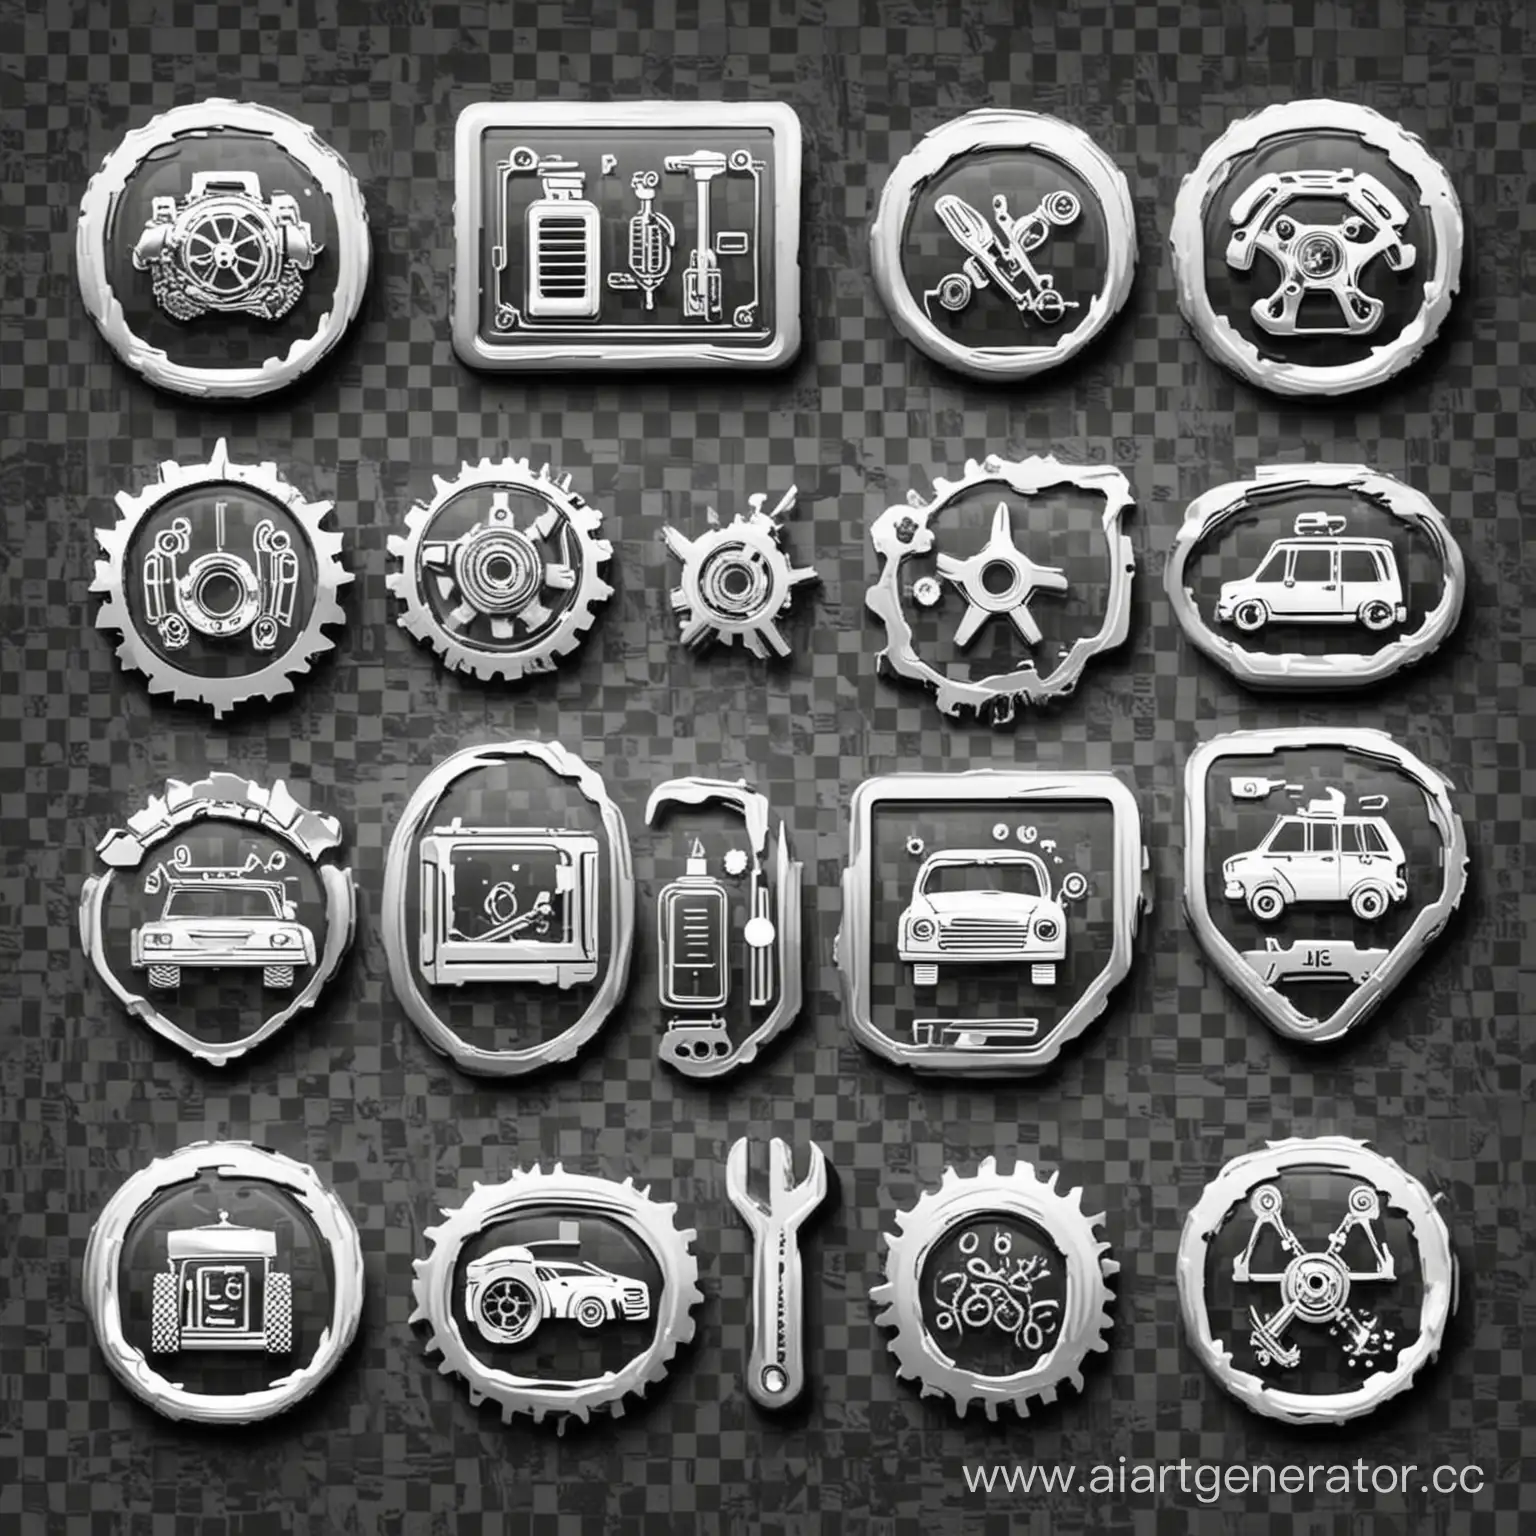 Vintage-Black-and-White-Auto-Service-Icons-on-Transparent-Background